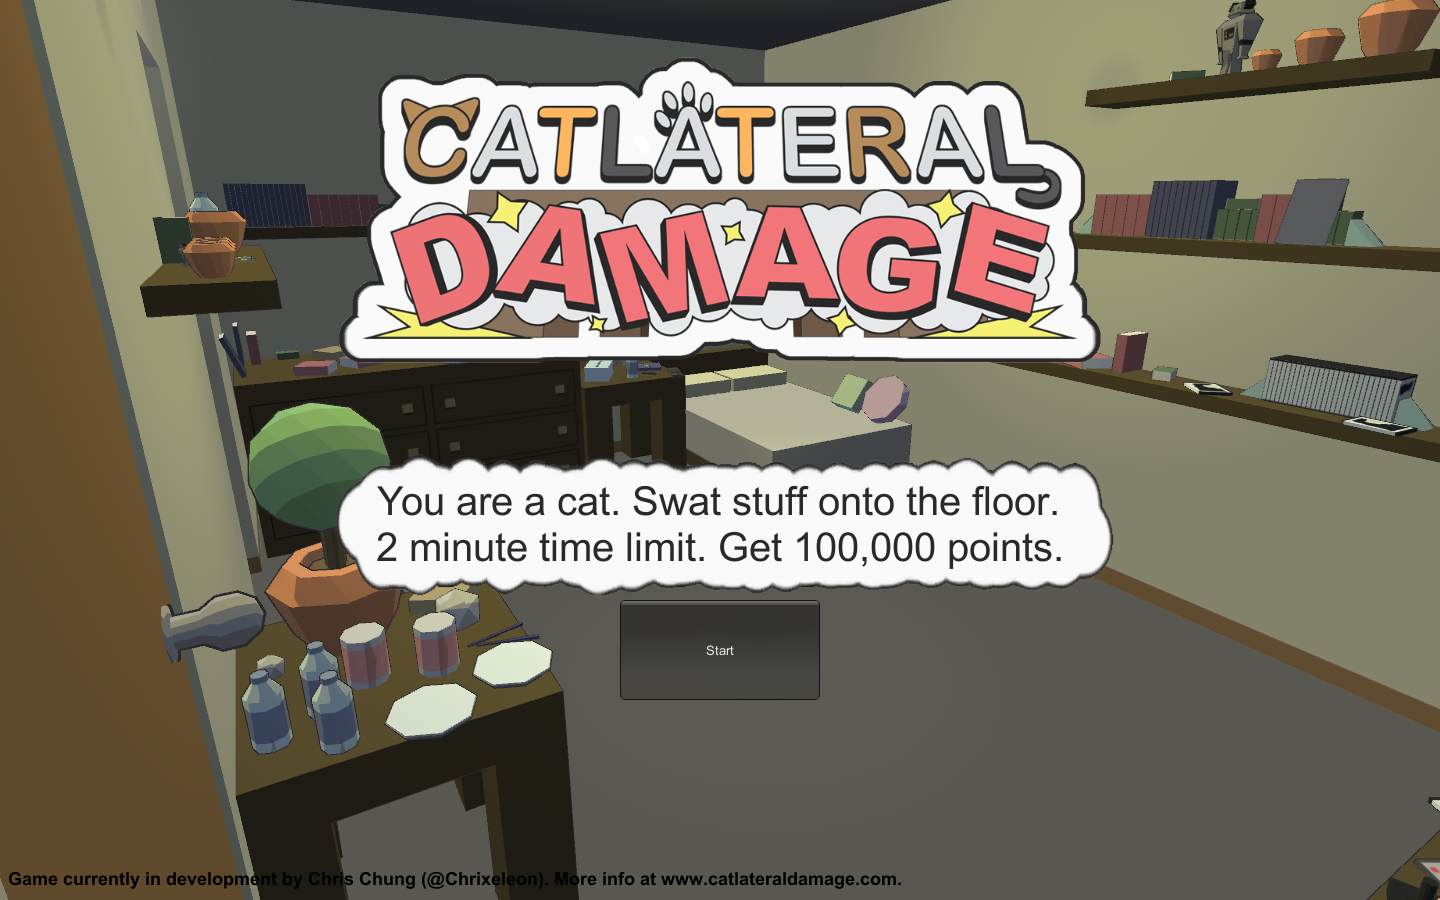 Geek insider, geekinsider, geekinsider. Com,, "catlateral damage" knocks fun off the desk and out of the park, gaming